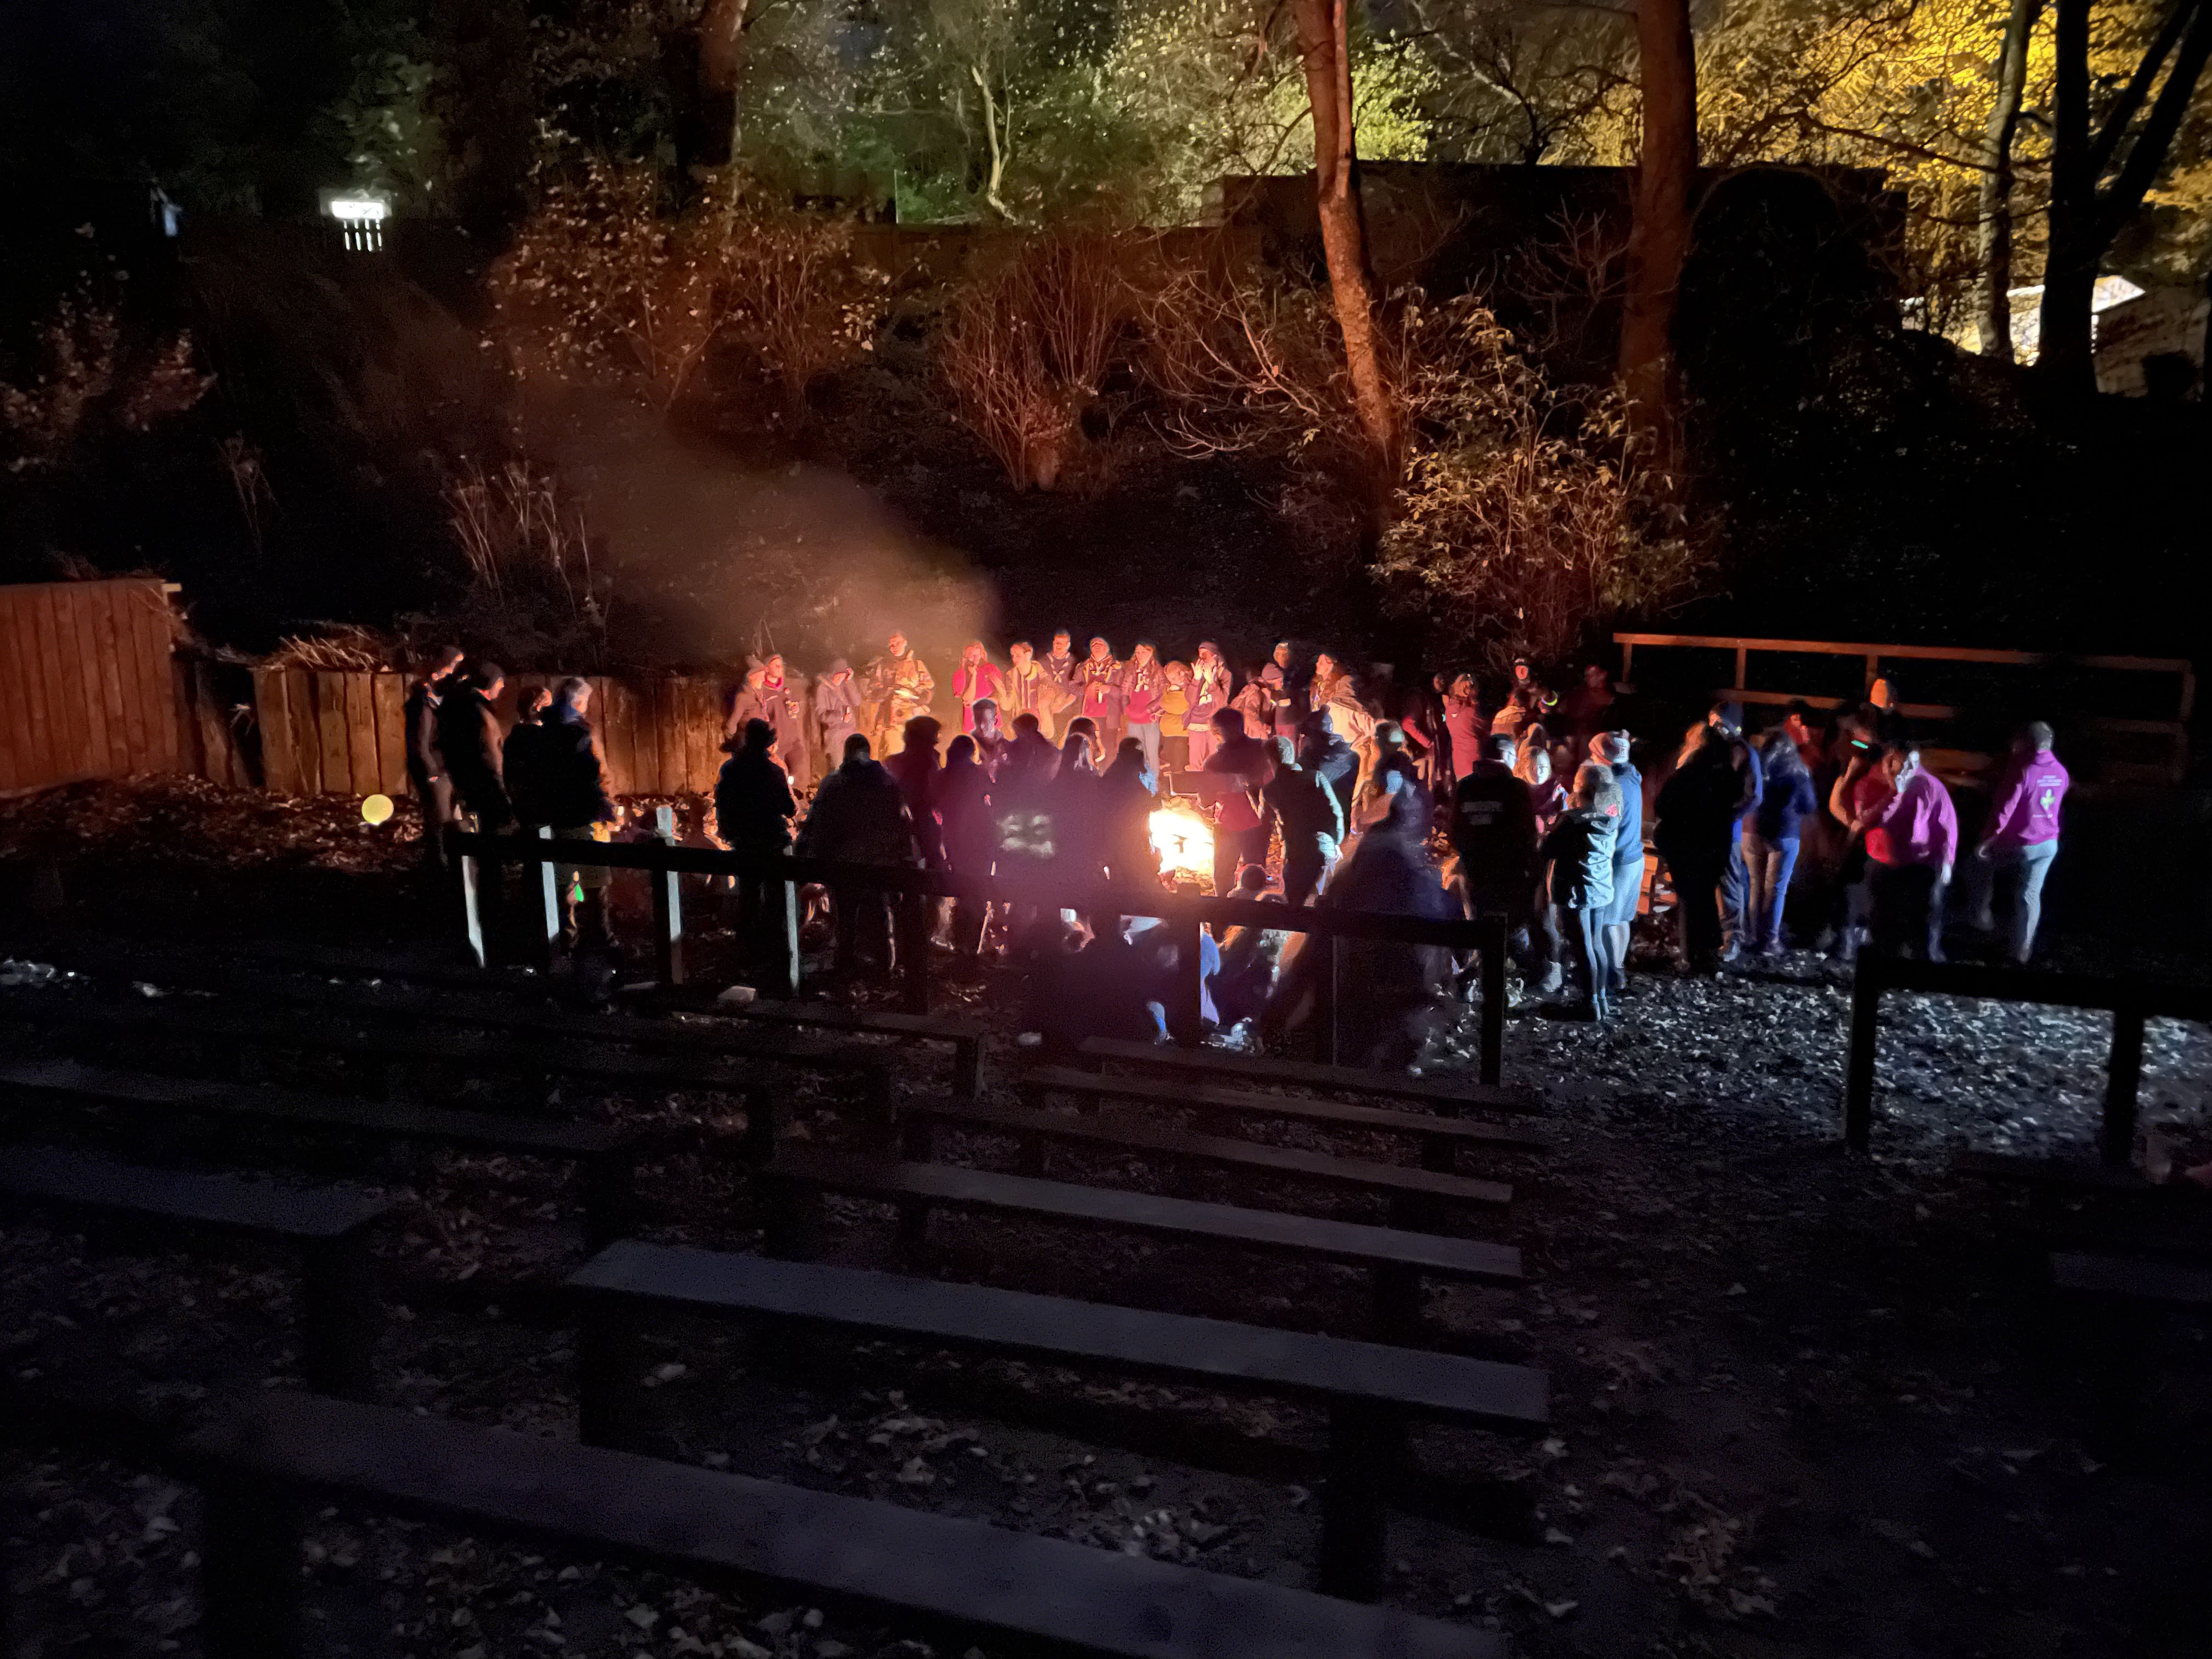 Wide shot from the back of the campfire arena, looking down to a large group huddled around the campfire